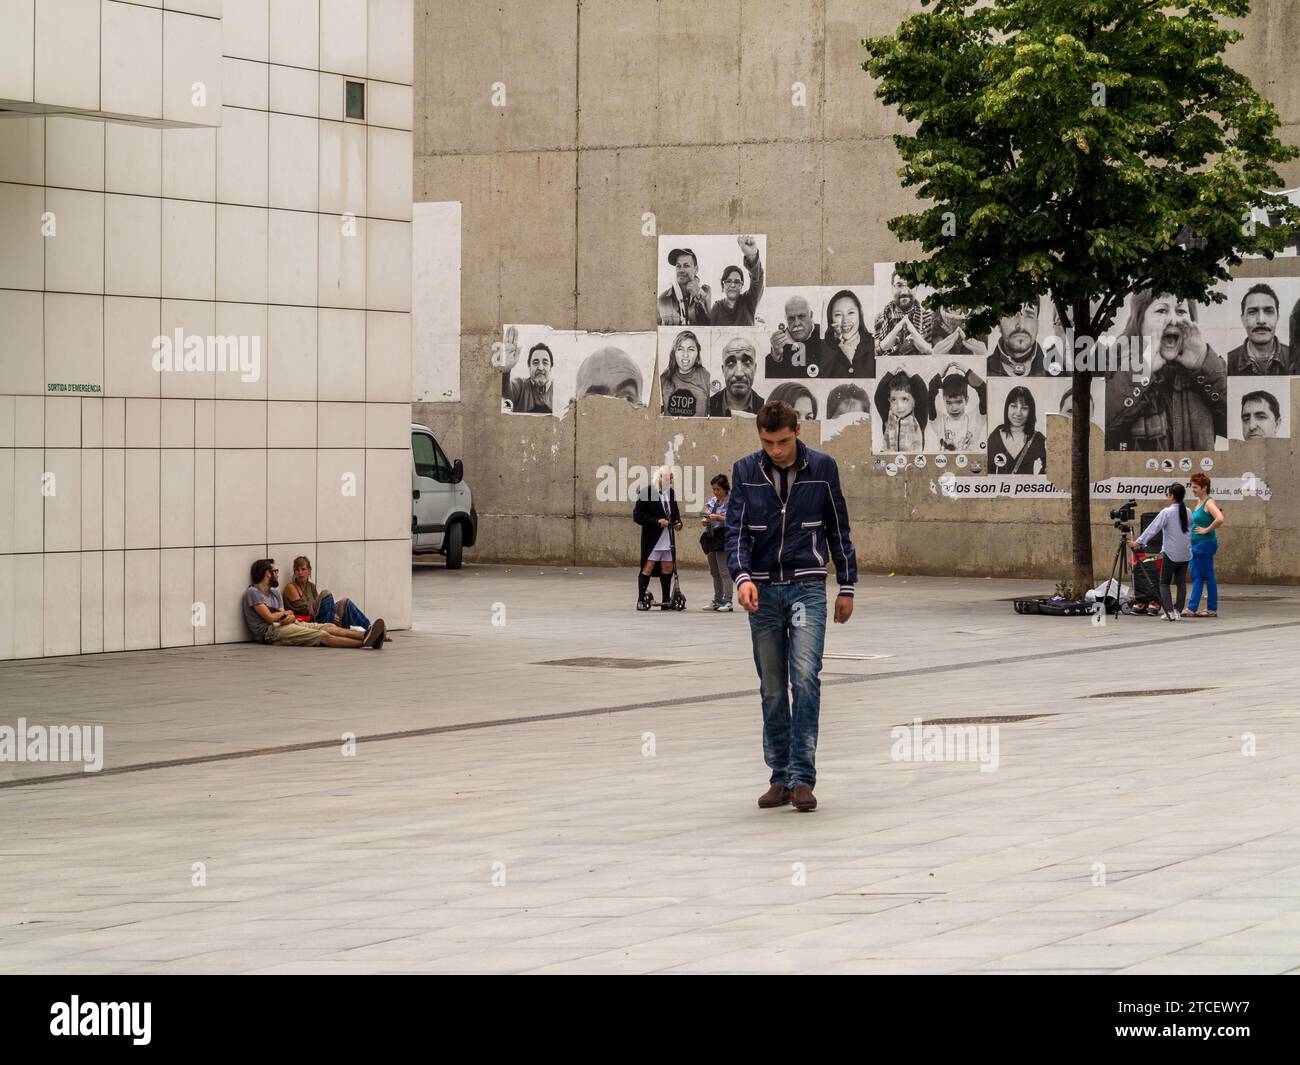 A head-down passerby and a film crew outside the Museum of Contemporary Art in Barcelona, Spain. Stock Photo